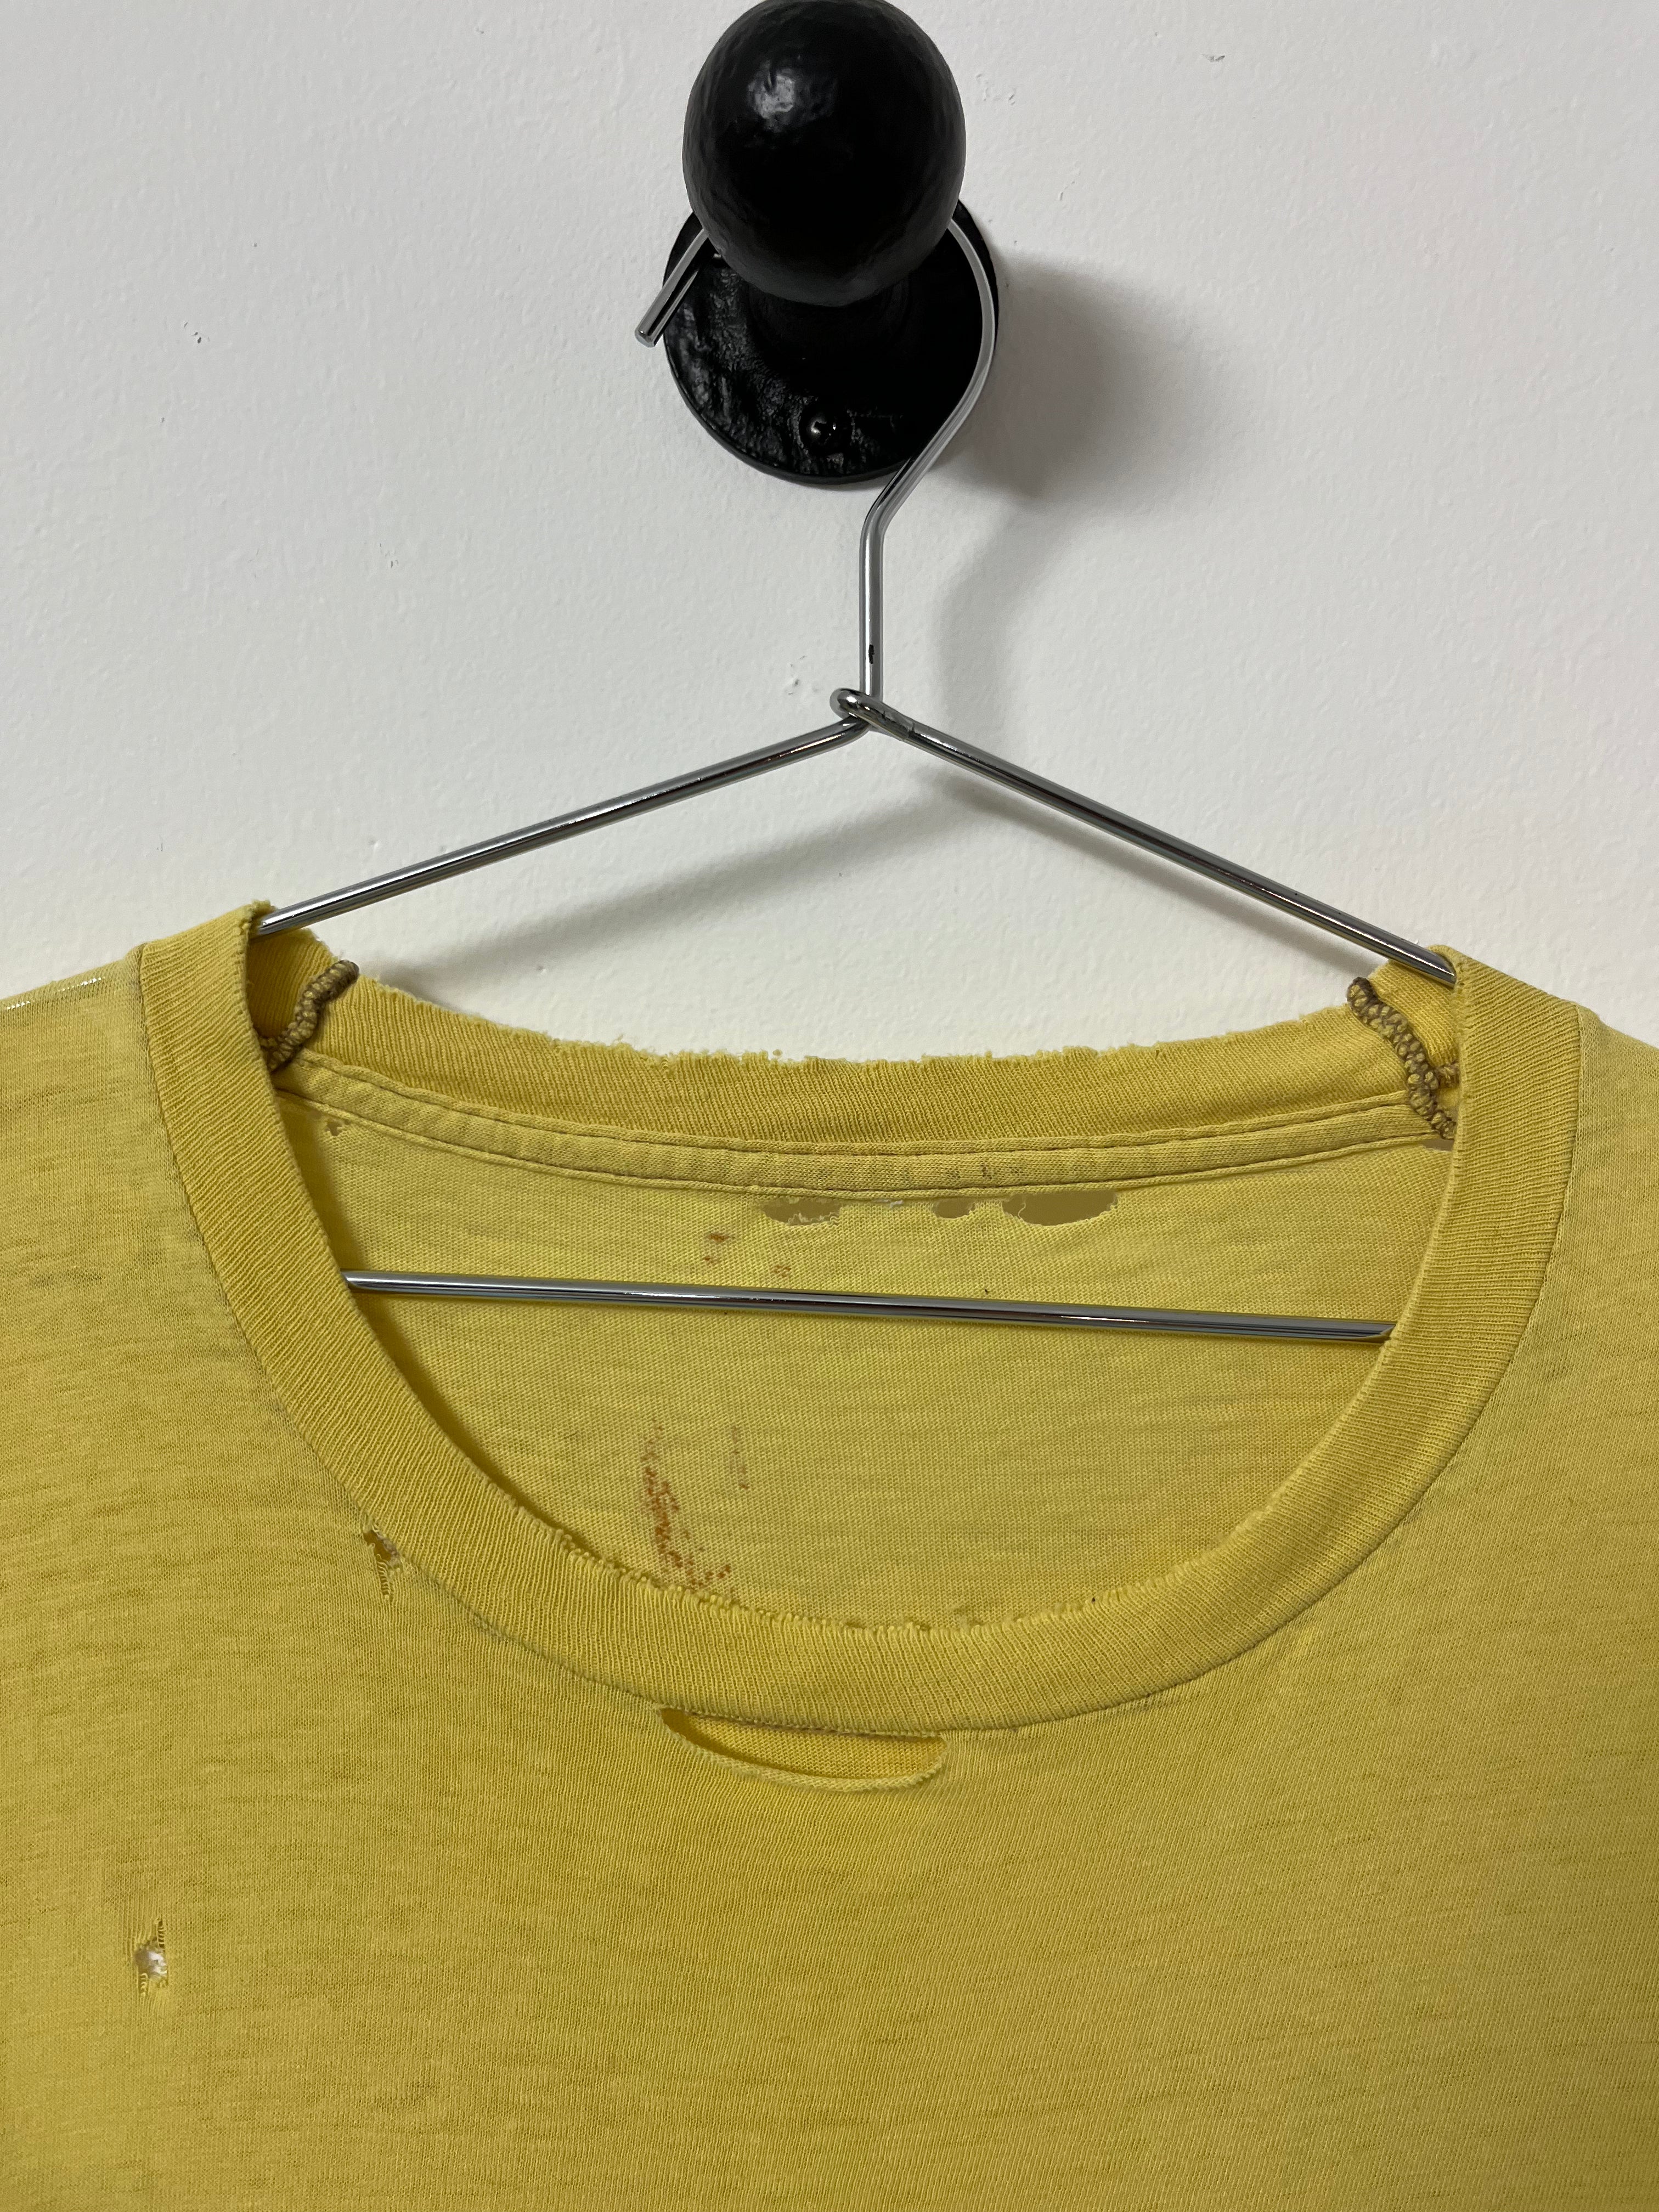 1970s Distressed Blank T-Shirt - Canary Yellow - S/M